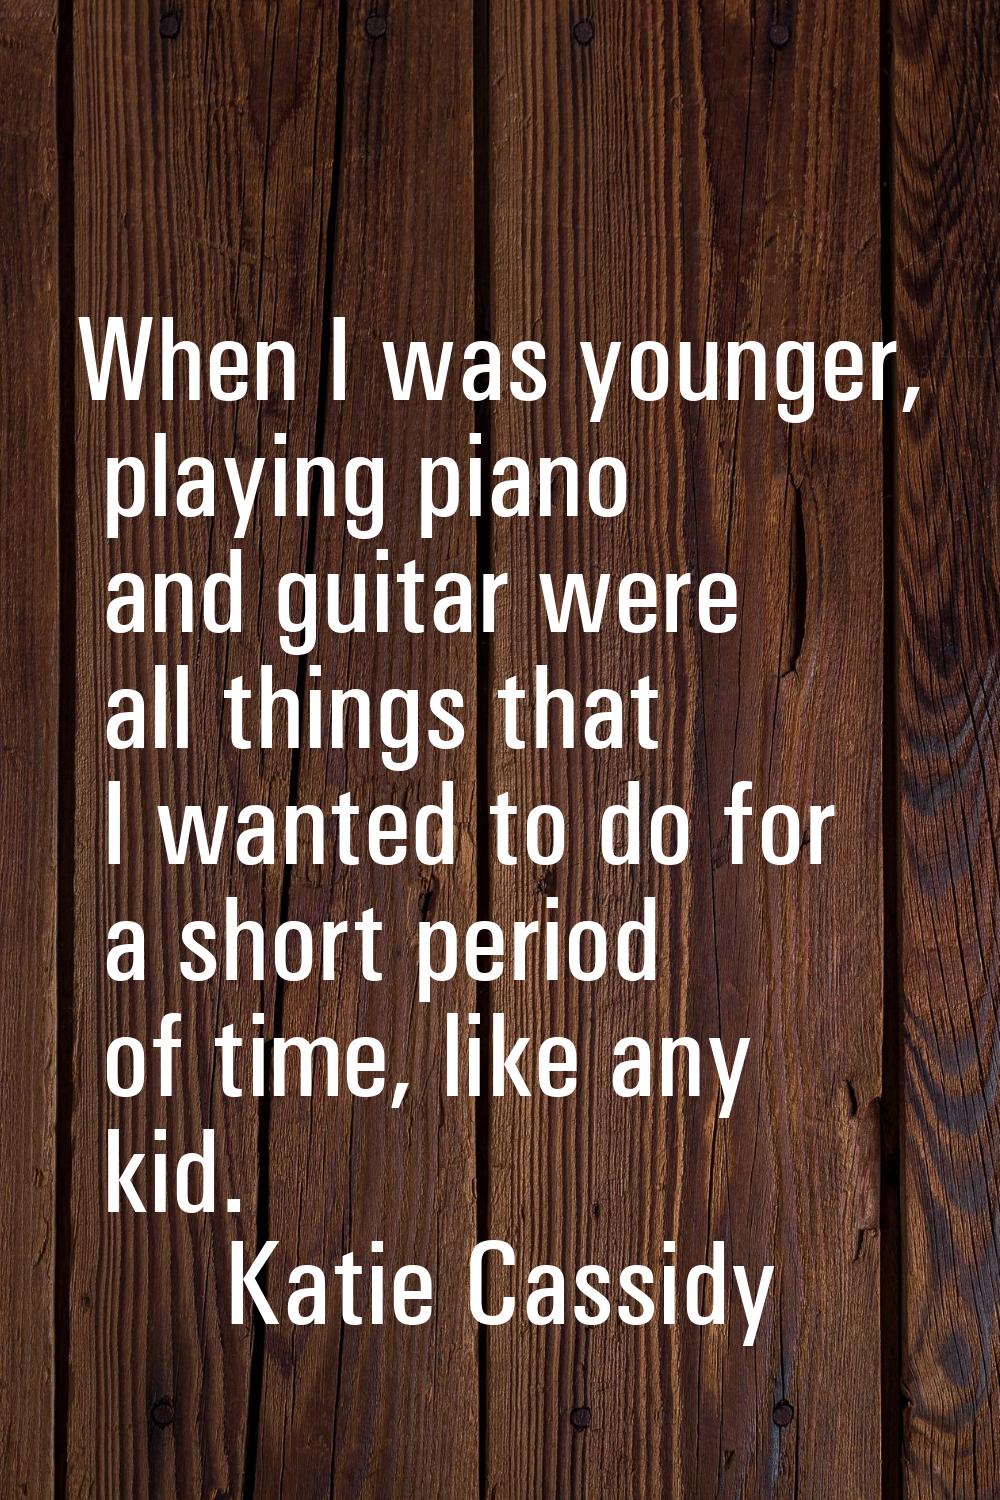 When I was younger, playing piano and guitar were all things that I wanted to do for a short period